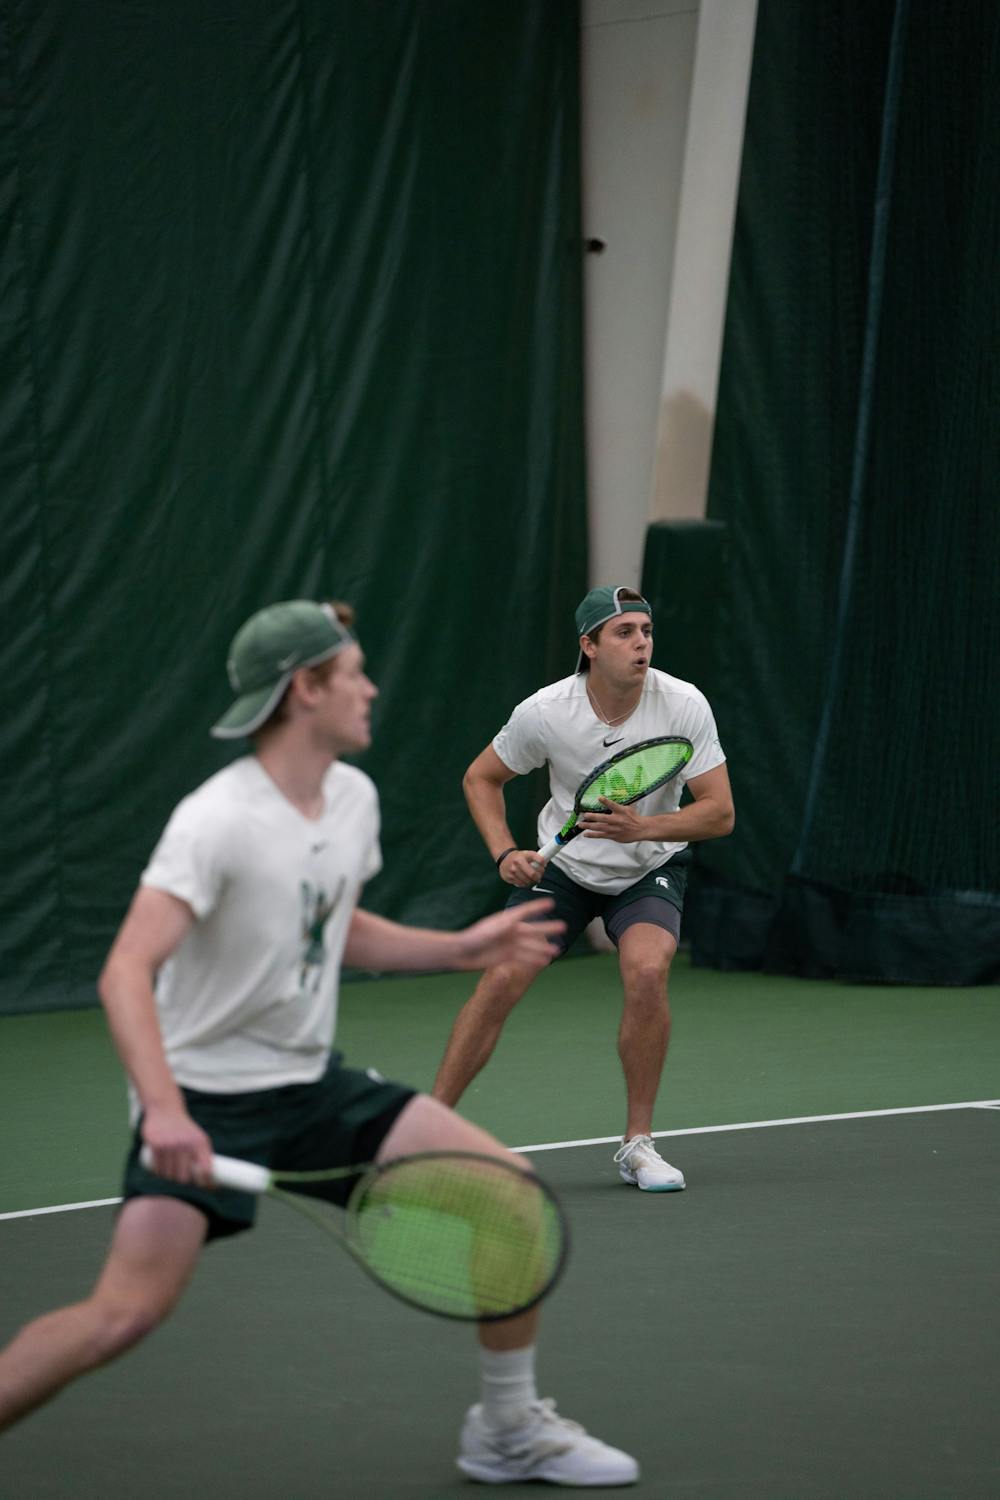 <p>Junior Graydon Lair gets ready to return the ball with his doubles partner sophomore Max Sheldon against Michigan at the MSU Tennis Center on March 30, 2023. The Spartans lost to the Wolverines 6-1.</p>